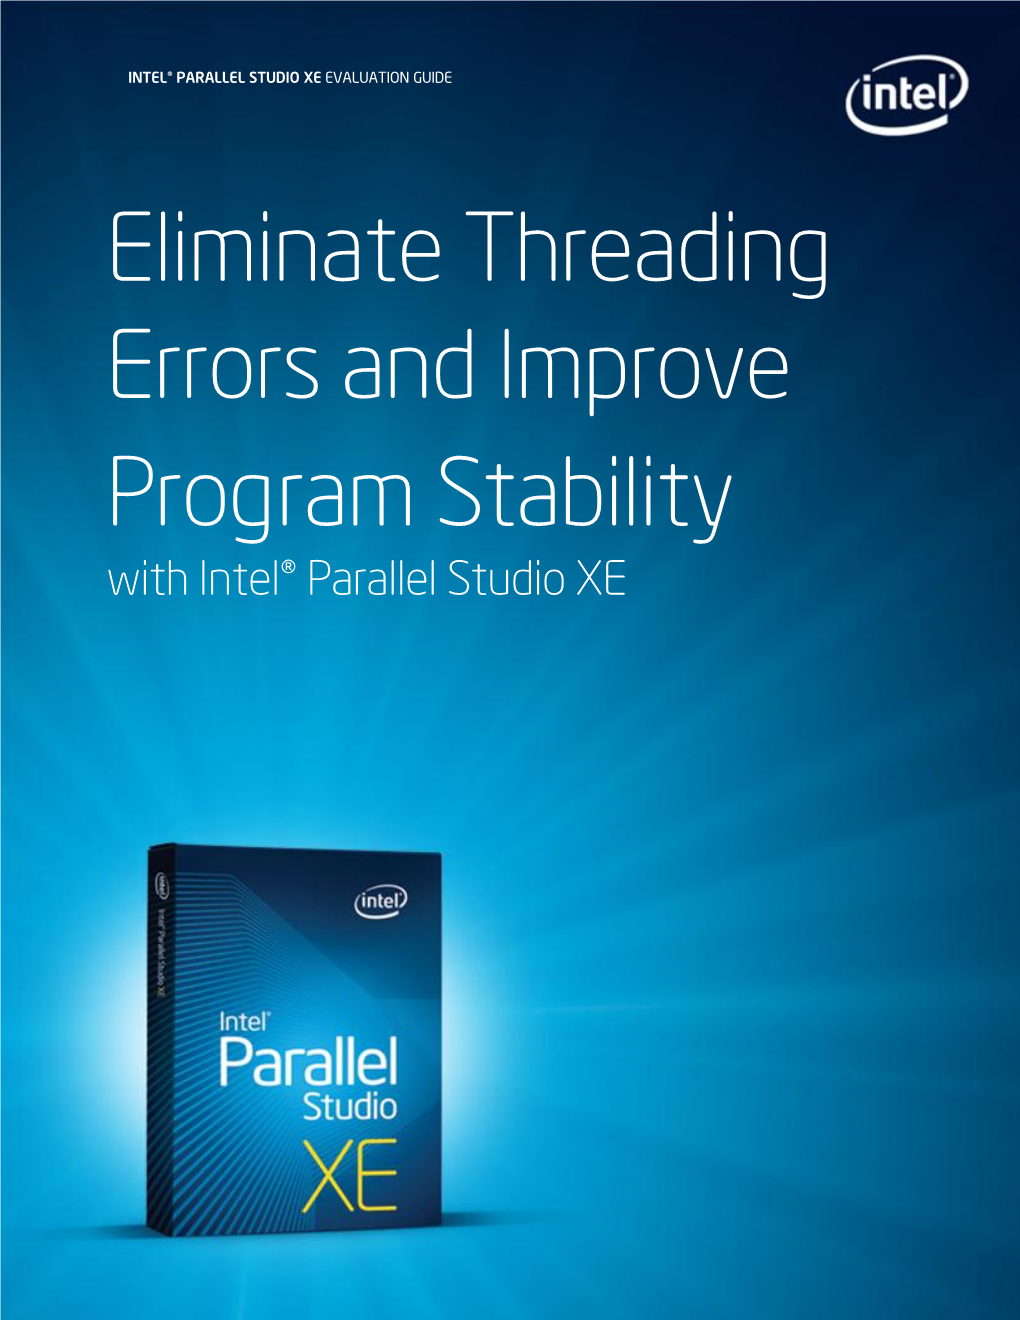 Eliminate Threading Errors and Improve Program Stability with Intel® Parallel Studio XE INTEL® PARALLEL STUDIO XE EVALUATION GUIDE